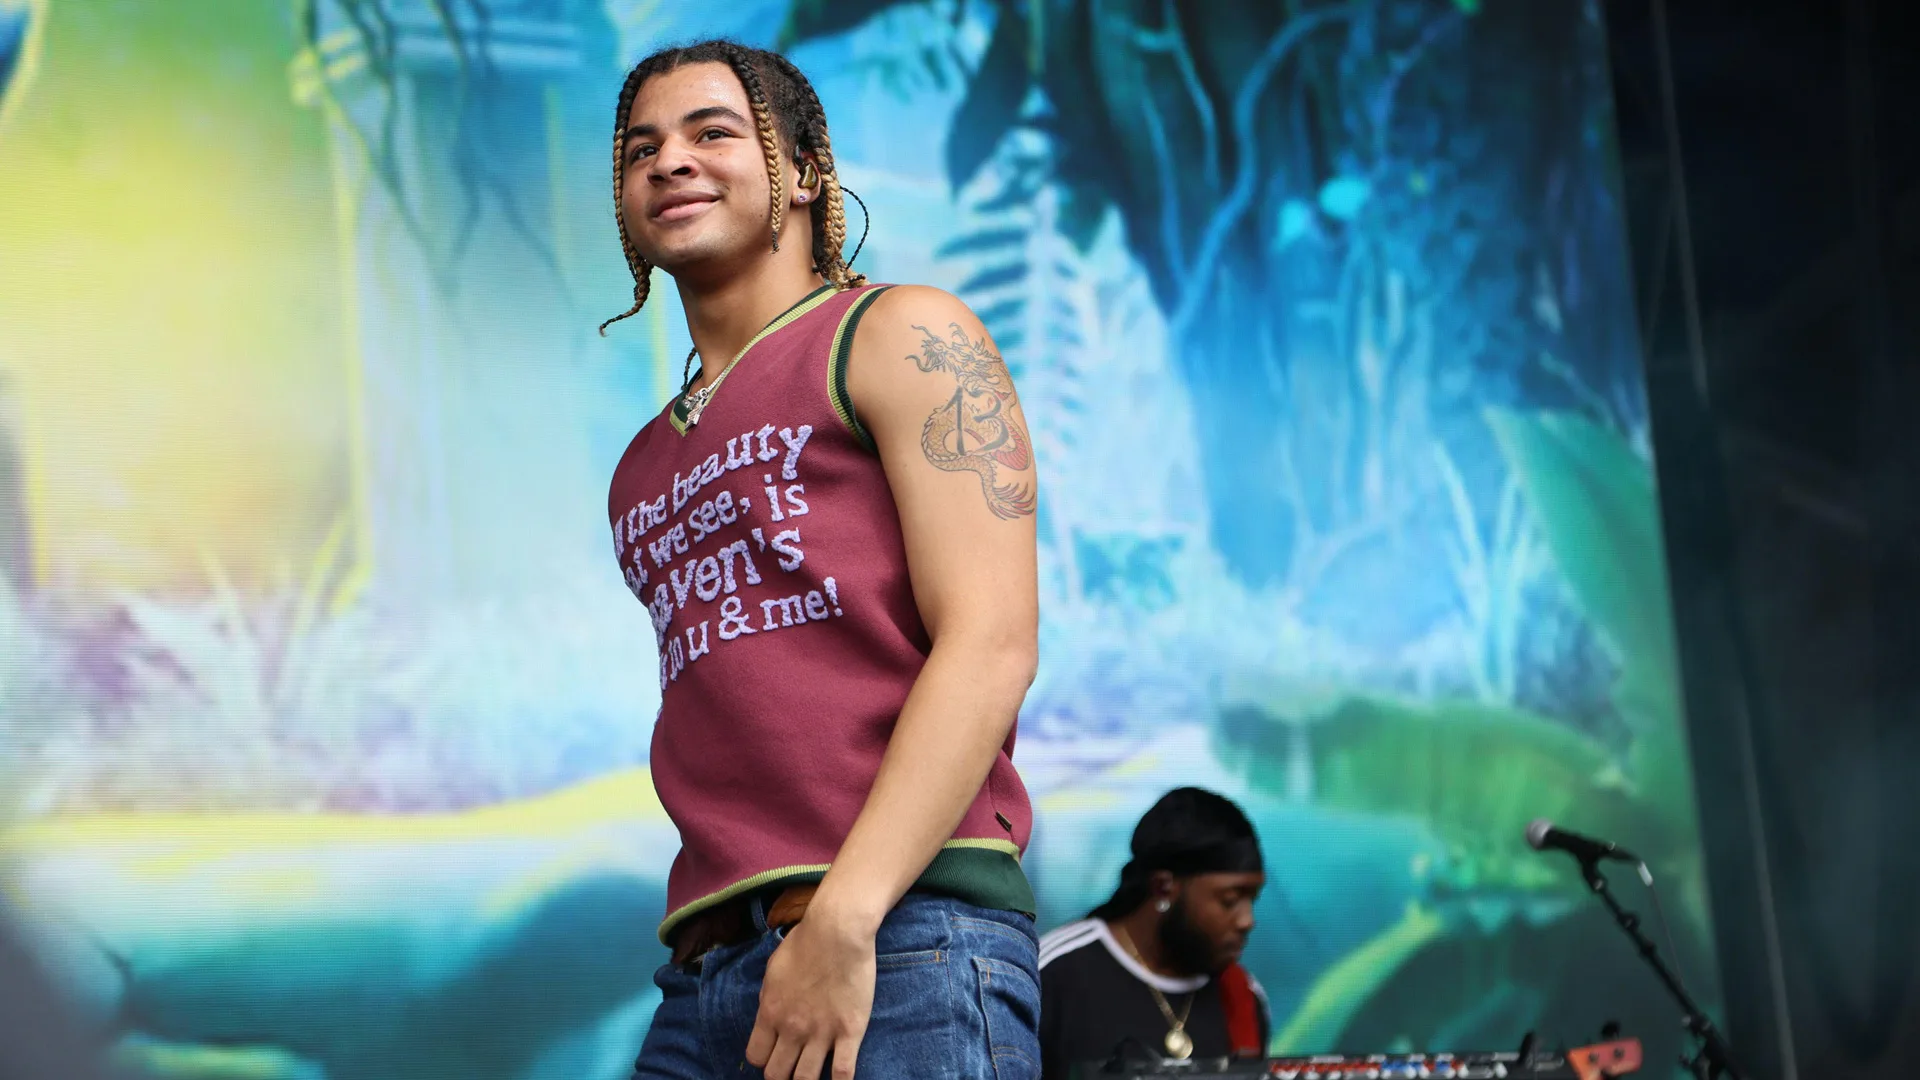 A photograph of the artist 24KGoldn on stage with a red vest against a tropical blue background